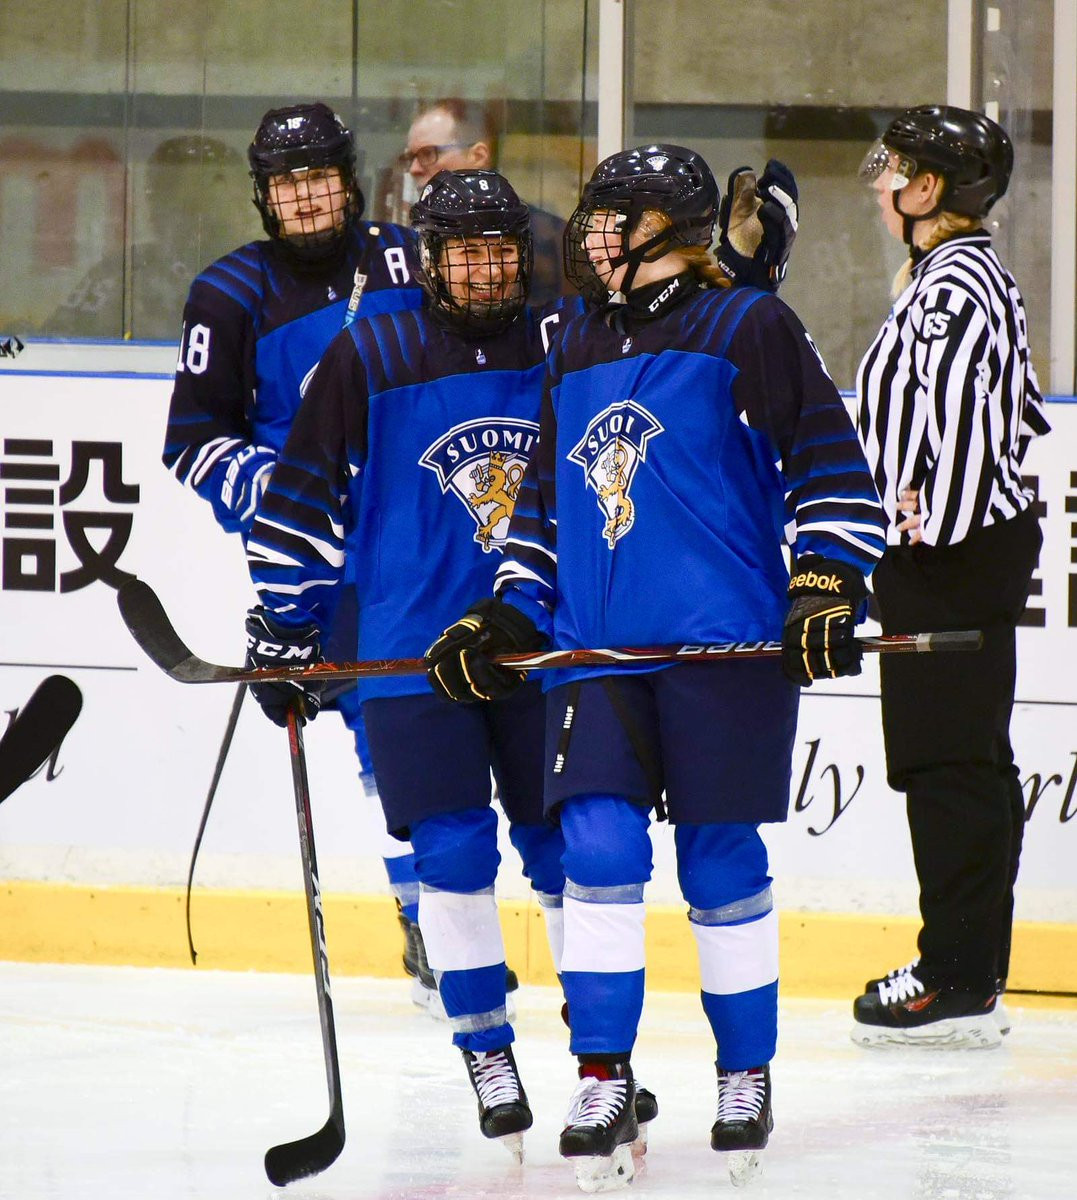 Finland to play defending champions United States in IIHF Under-18 Women's World Championship semi-final